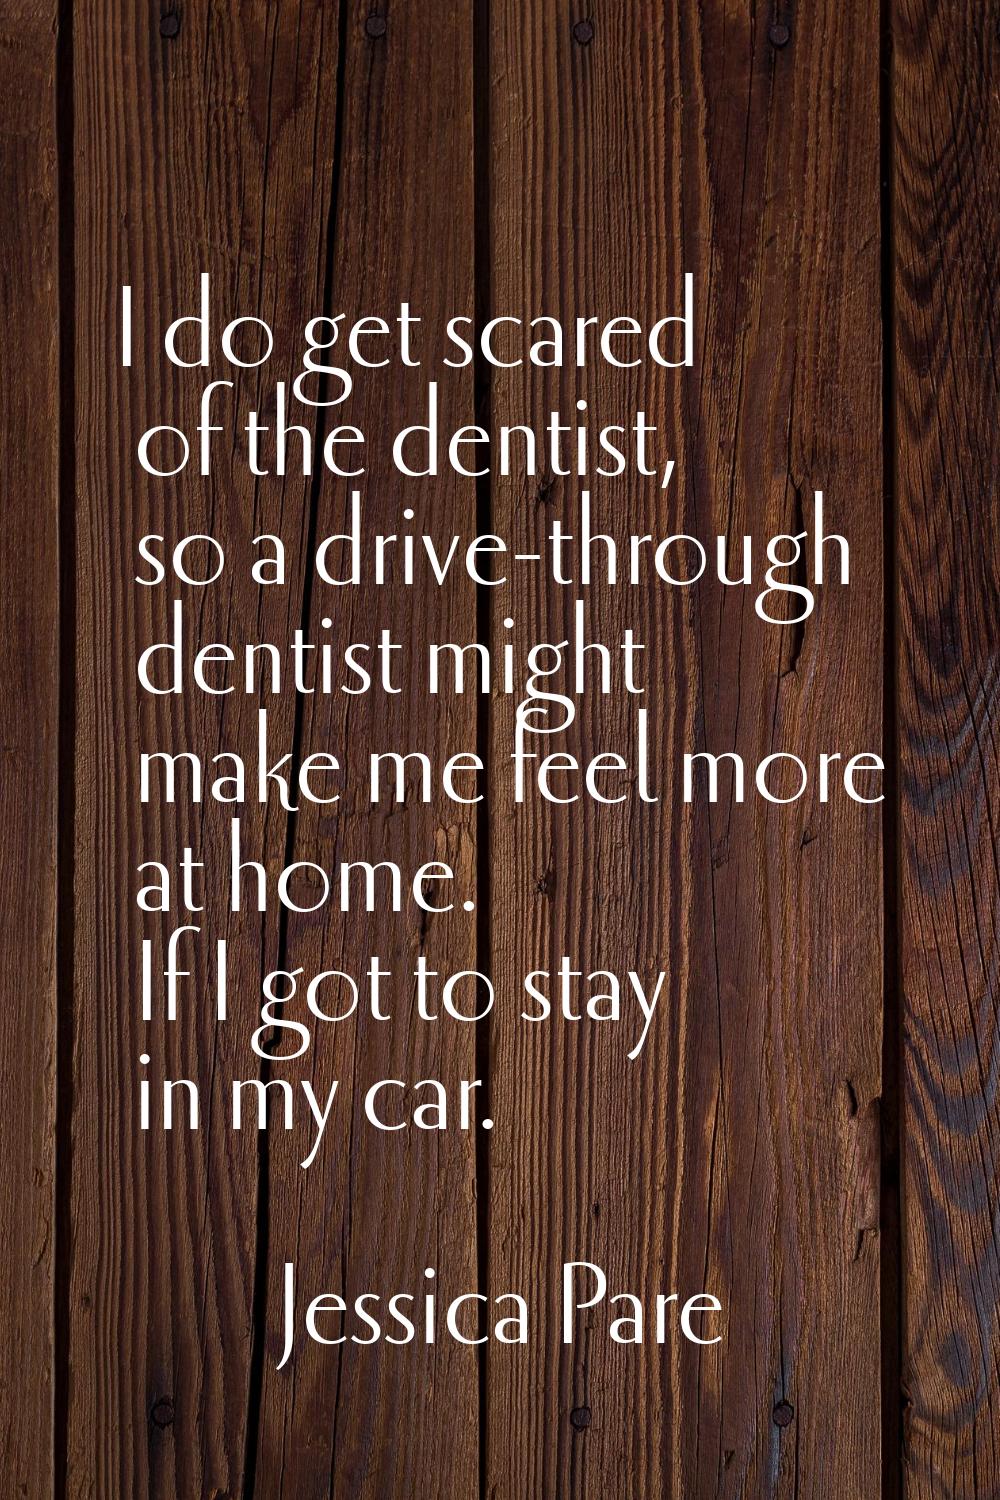 I do get scared of the dentist, so a drive-through dentist might make me feel more at home. If I go